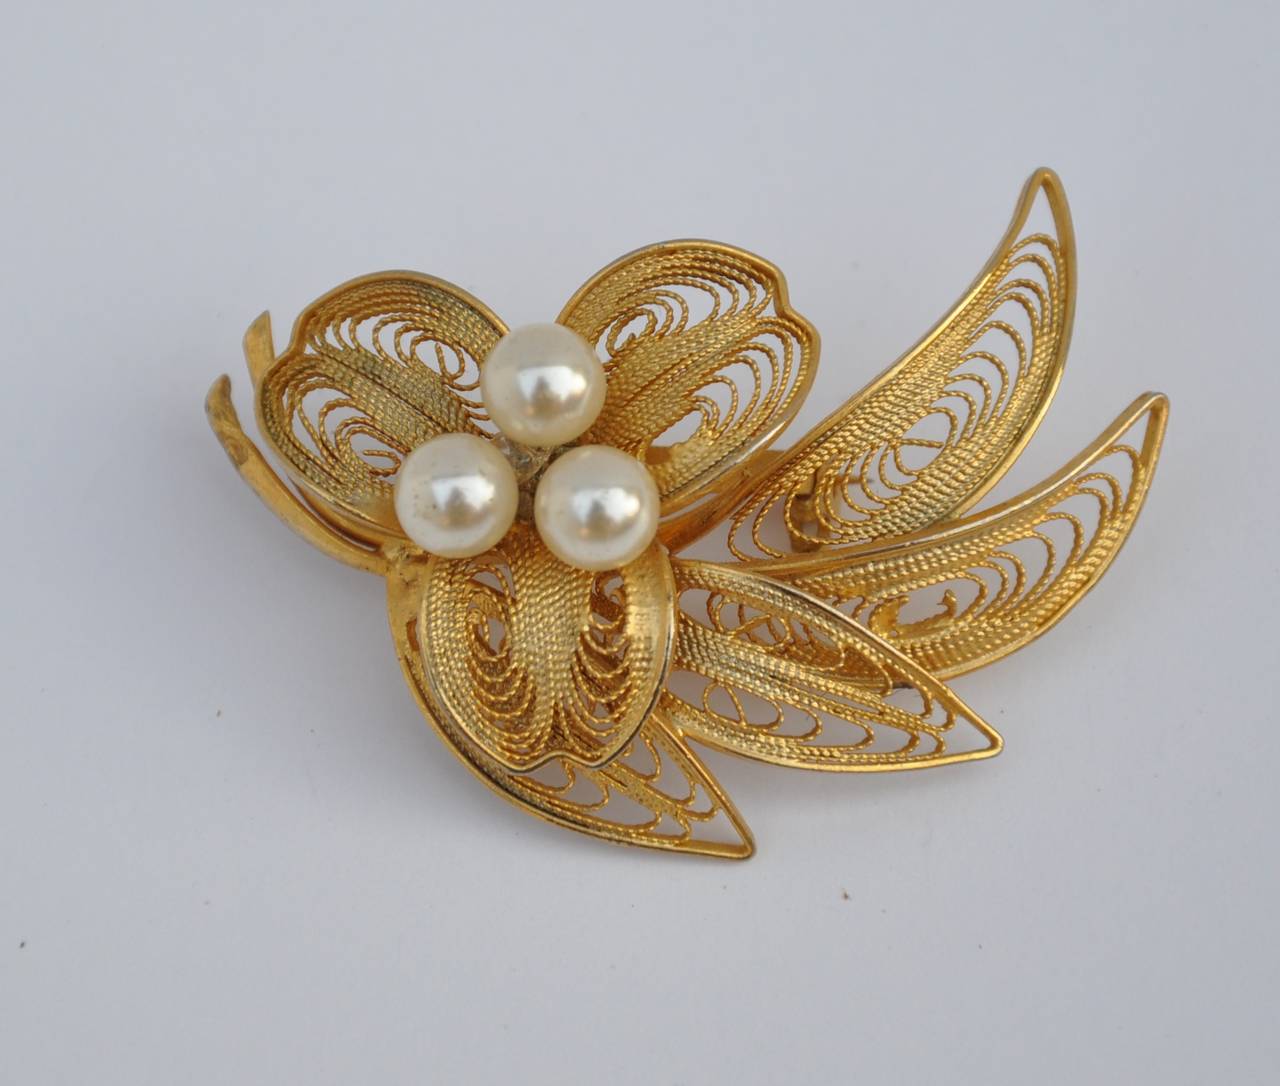 Large gilded gold filigree accented with pearls brooch measures 2" in length, 1 1/2" in height and 6/8" in depth.